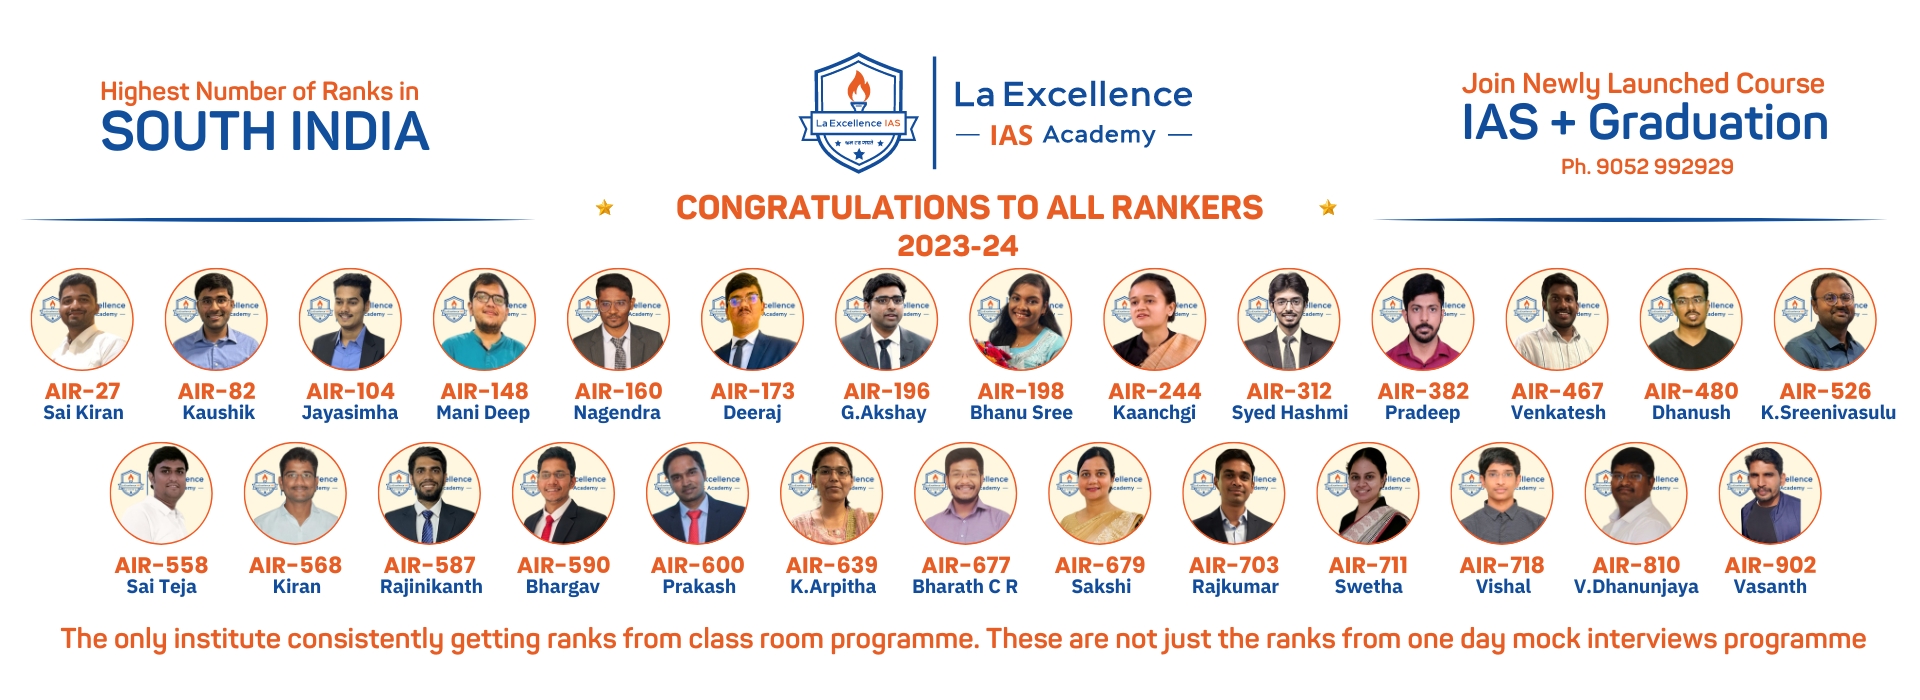 Highest Number of Ranks in South India | Congratulations to All Rankers 2023-24